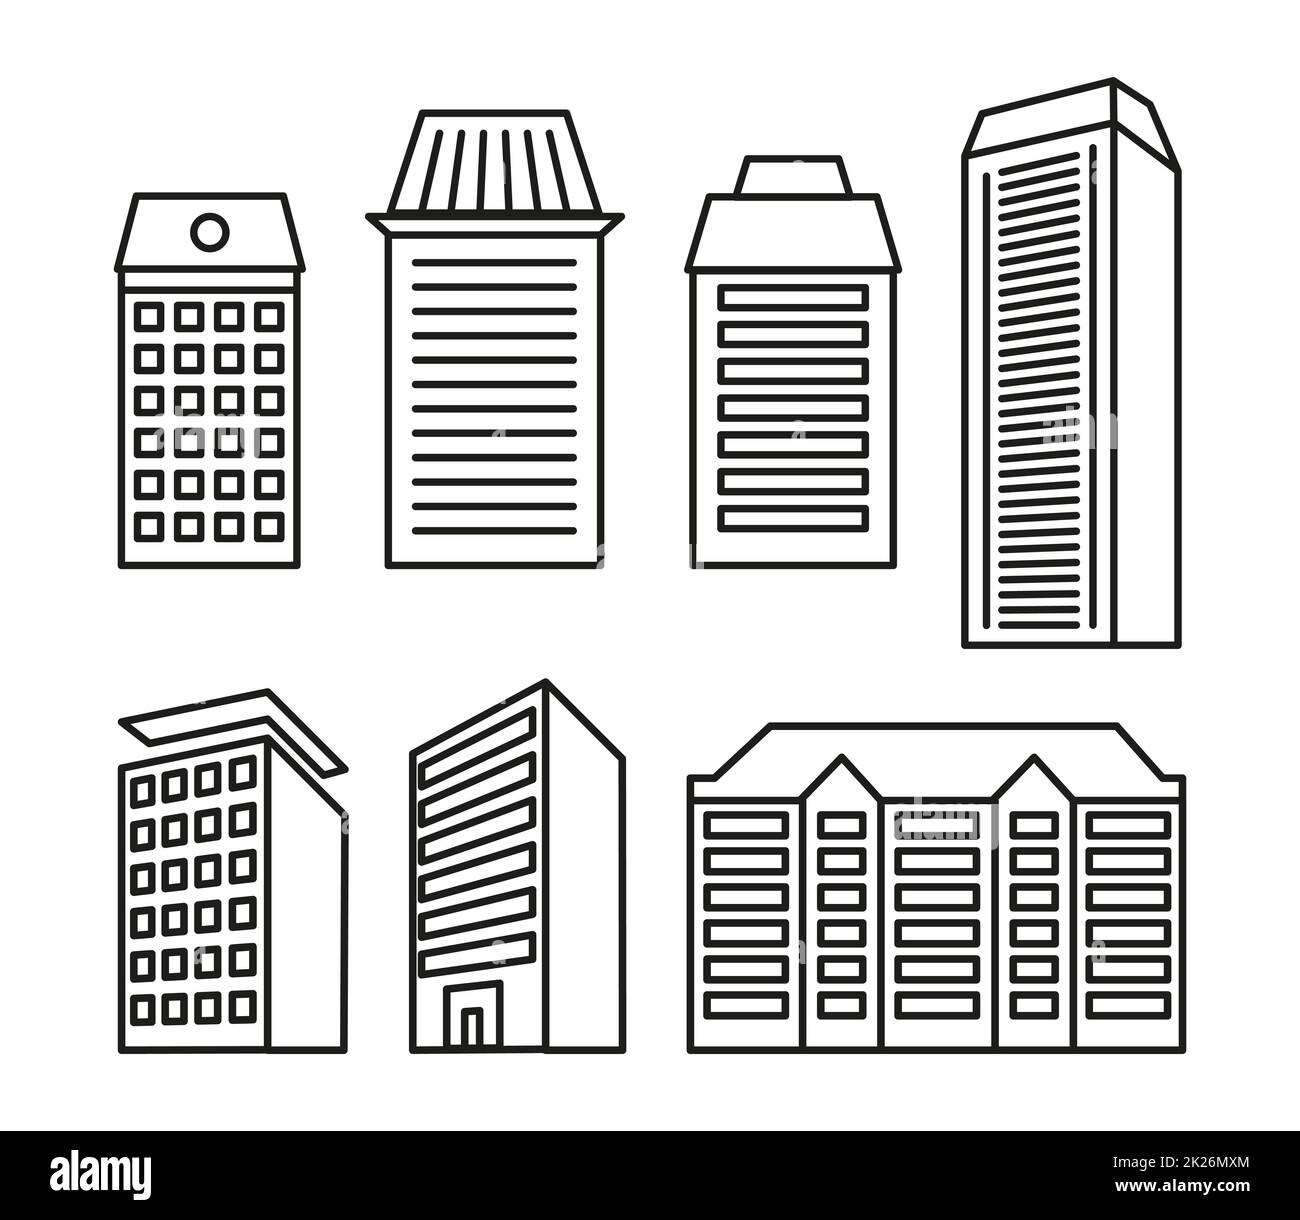 Isolated black and white color blocks of flats and low-rise houses in lineart style icons collection, elements of urban architectural buildings vector illustrations set. Stock Photo